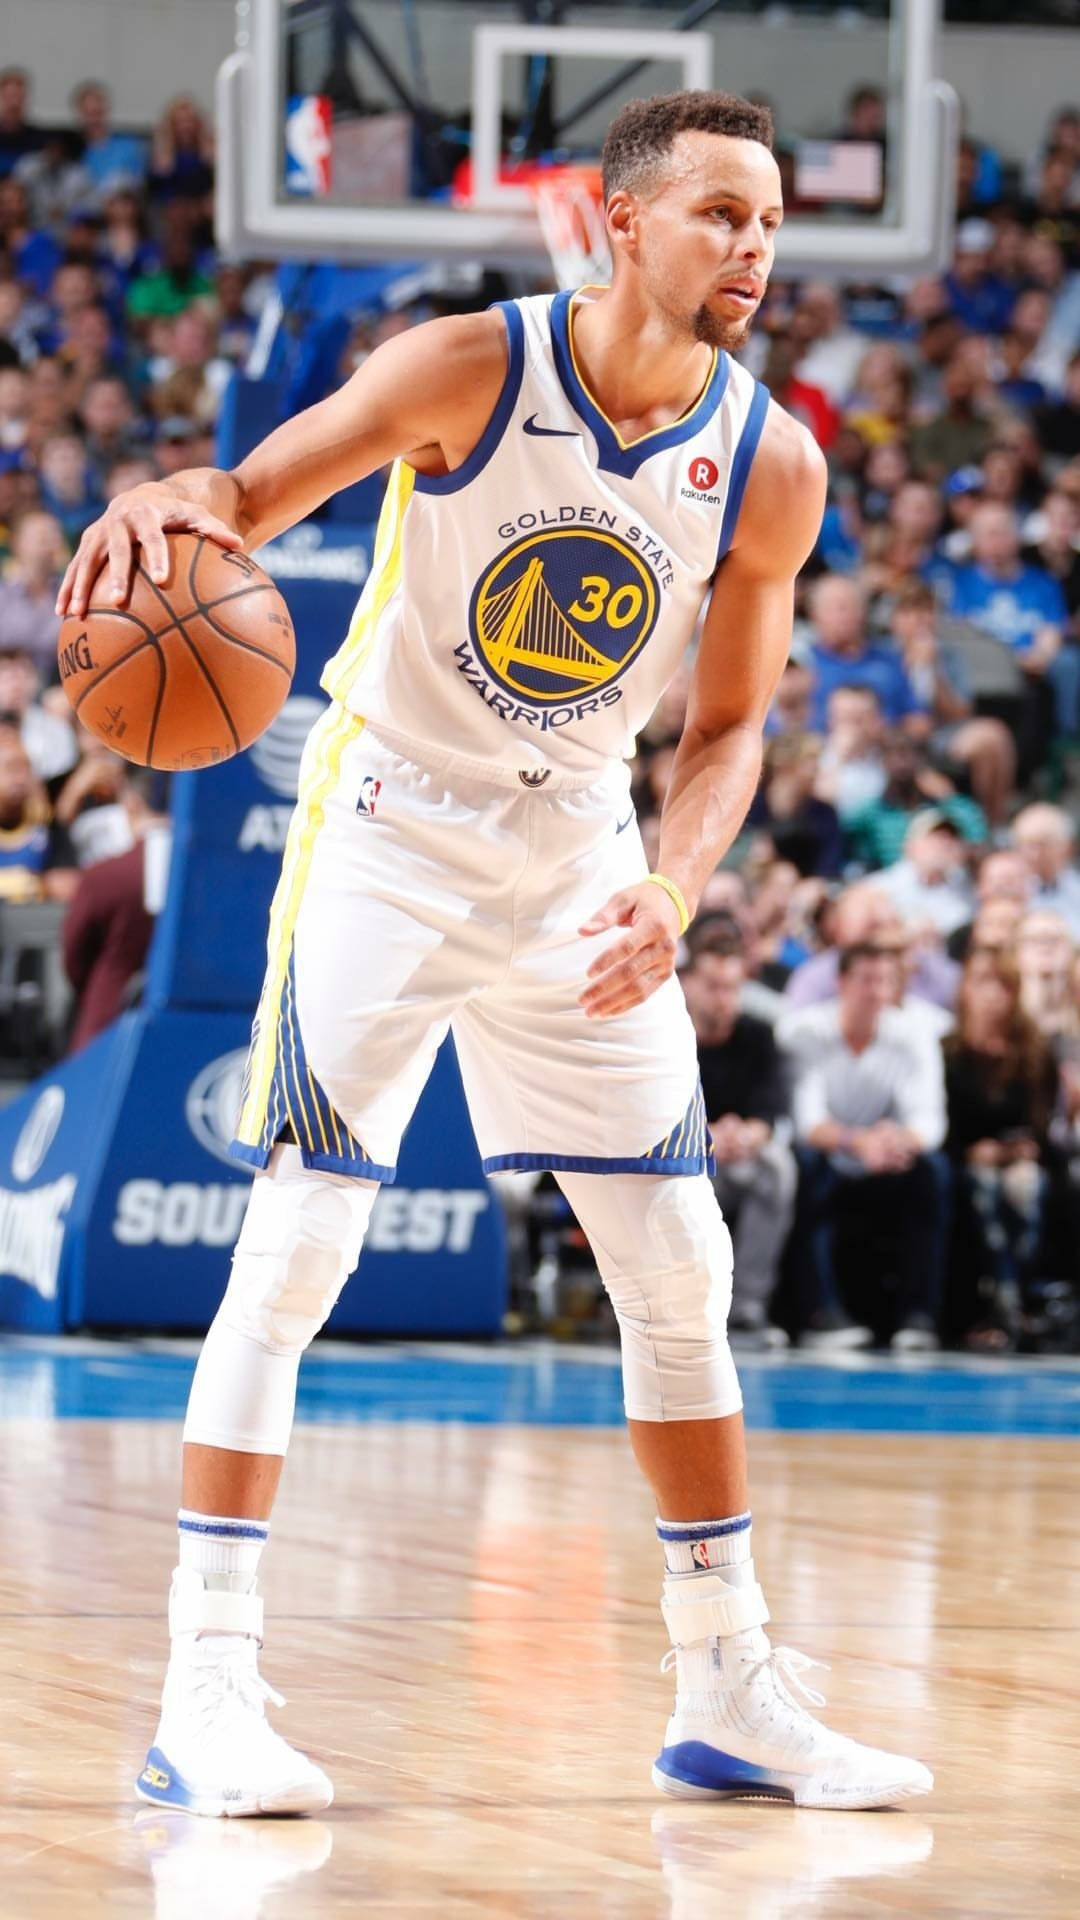 Stephen Curry, 2017 wallpapers, Ryan Sellers, Curry photos, 1080x1920 Full HD Handy